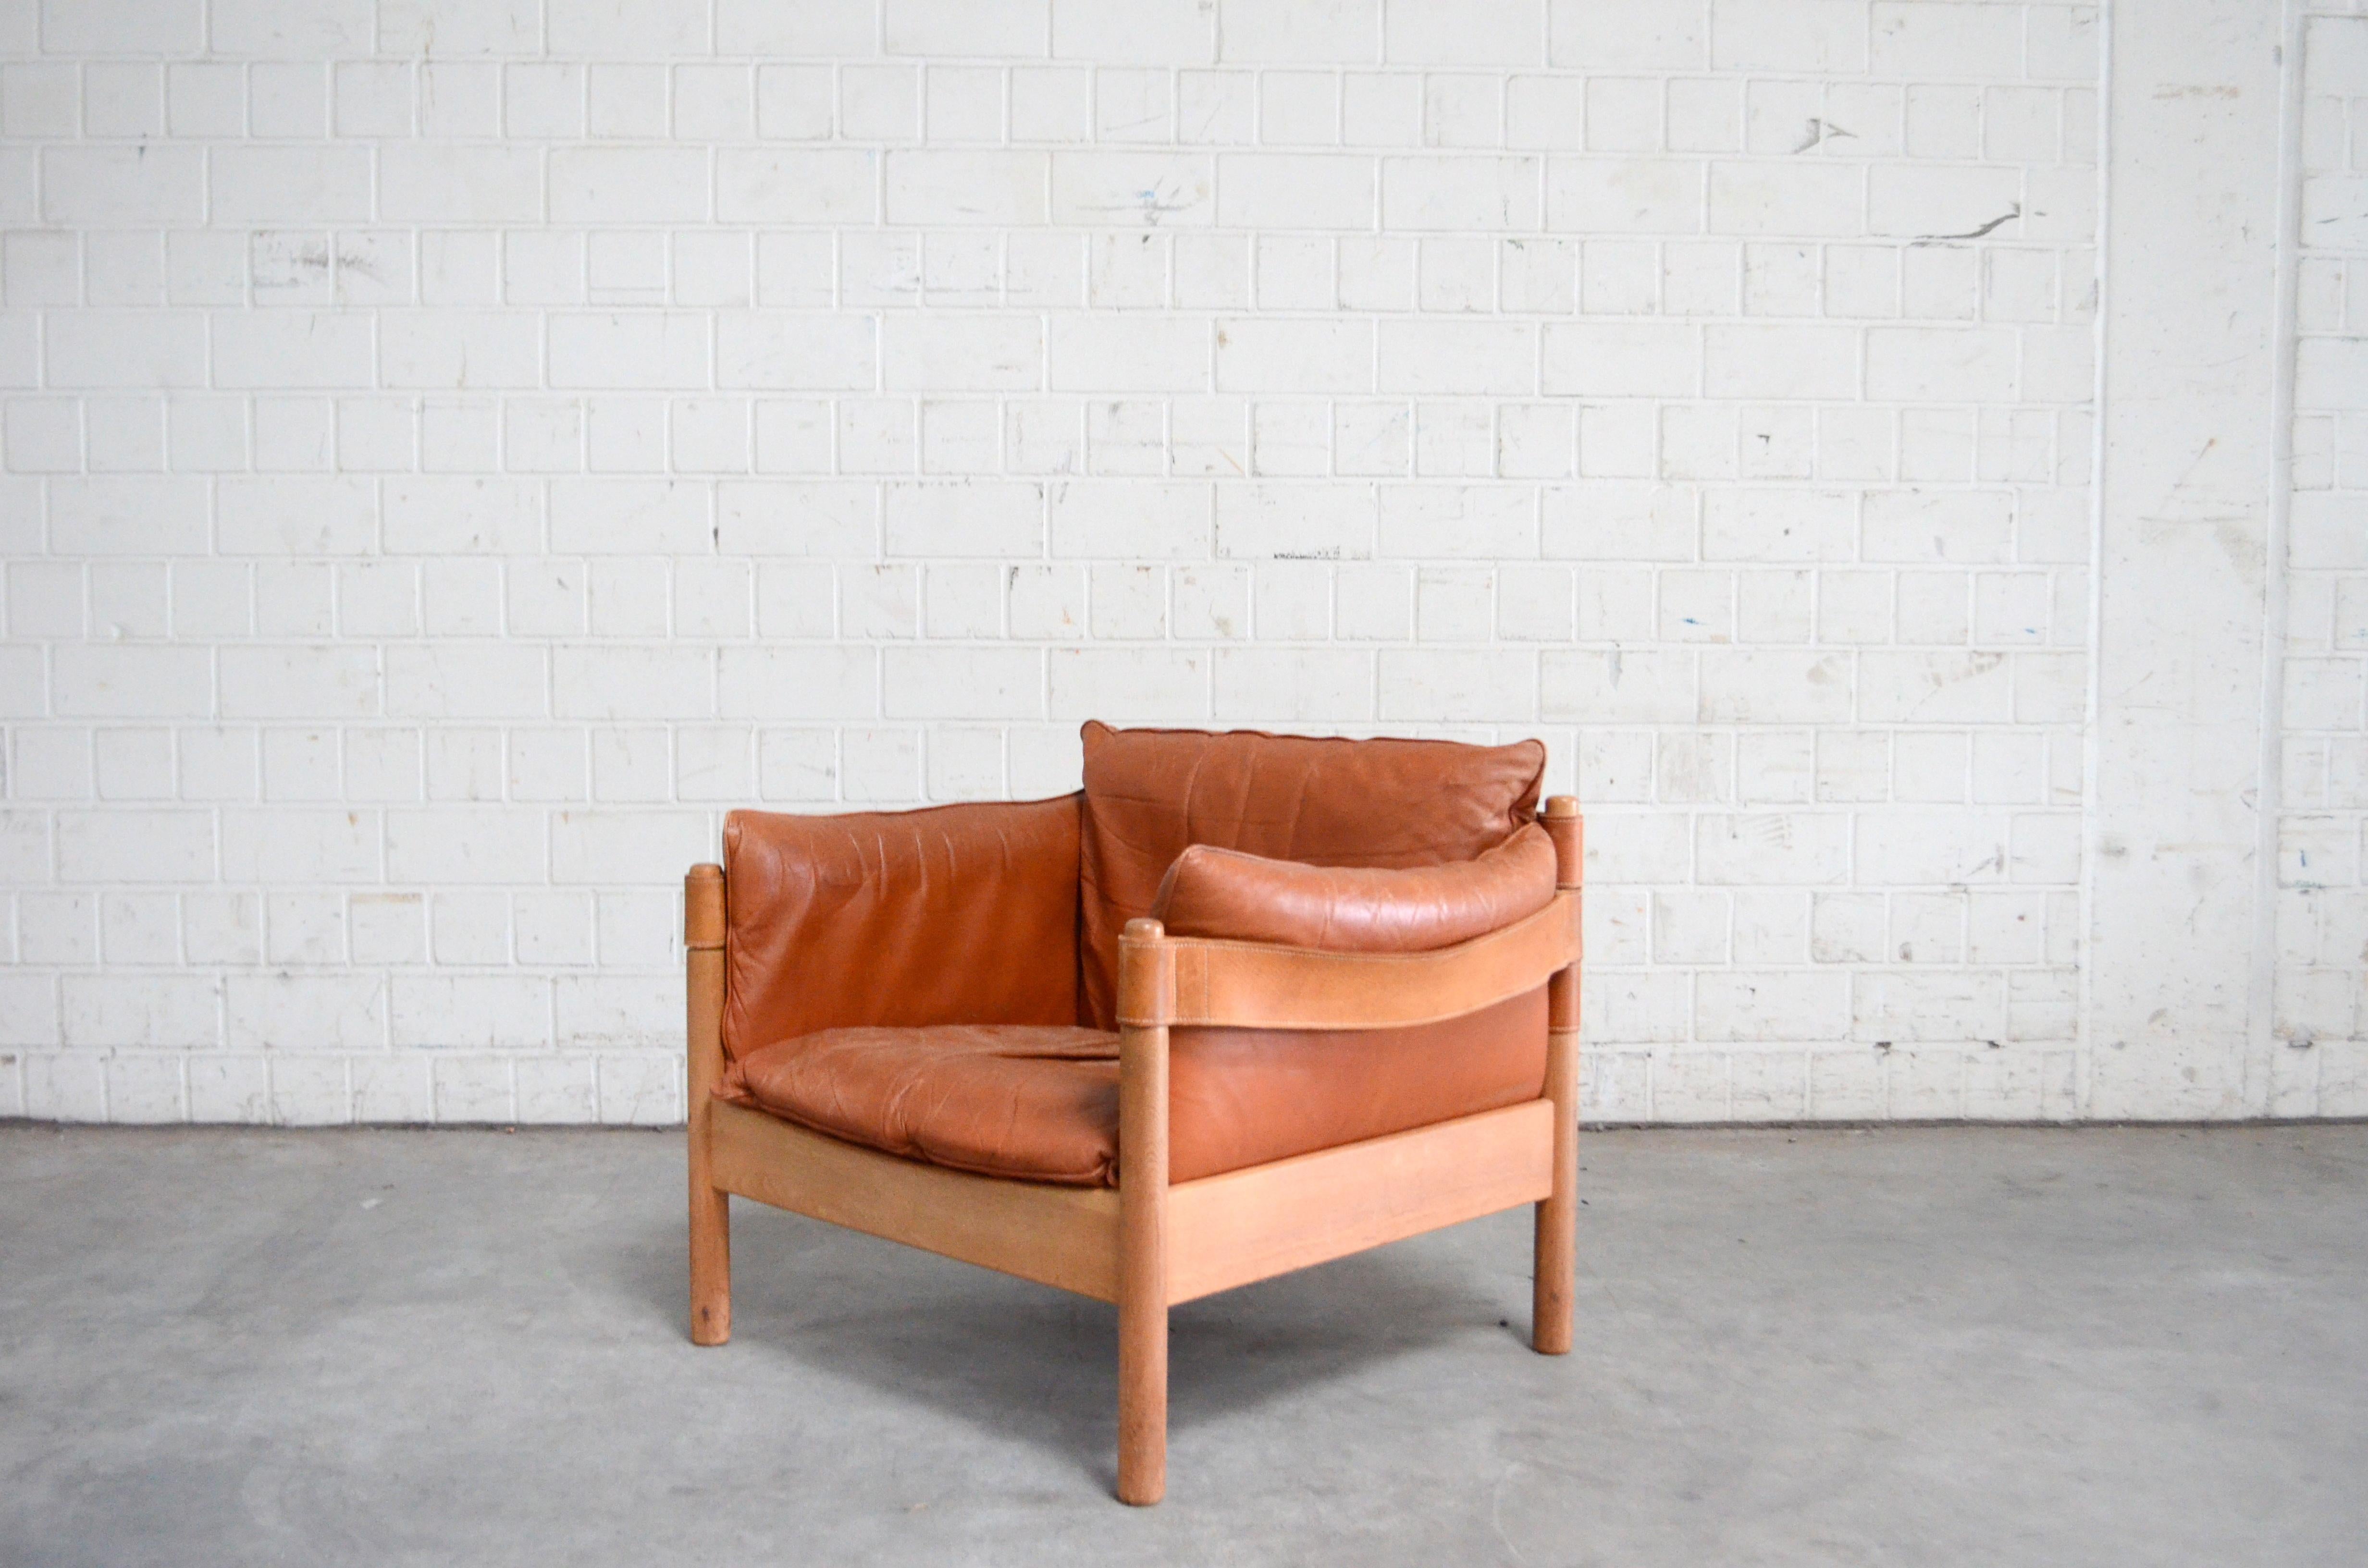 Danish armchair with cognac saddle leather.
Oak frame and cushions.
This design is made with vegetal leather straps.
Producer is unknown.